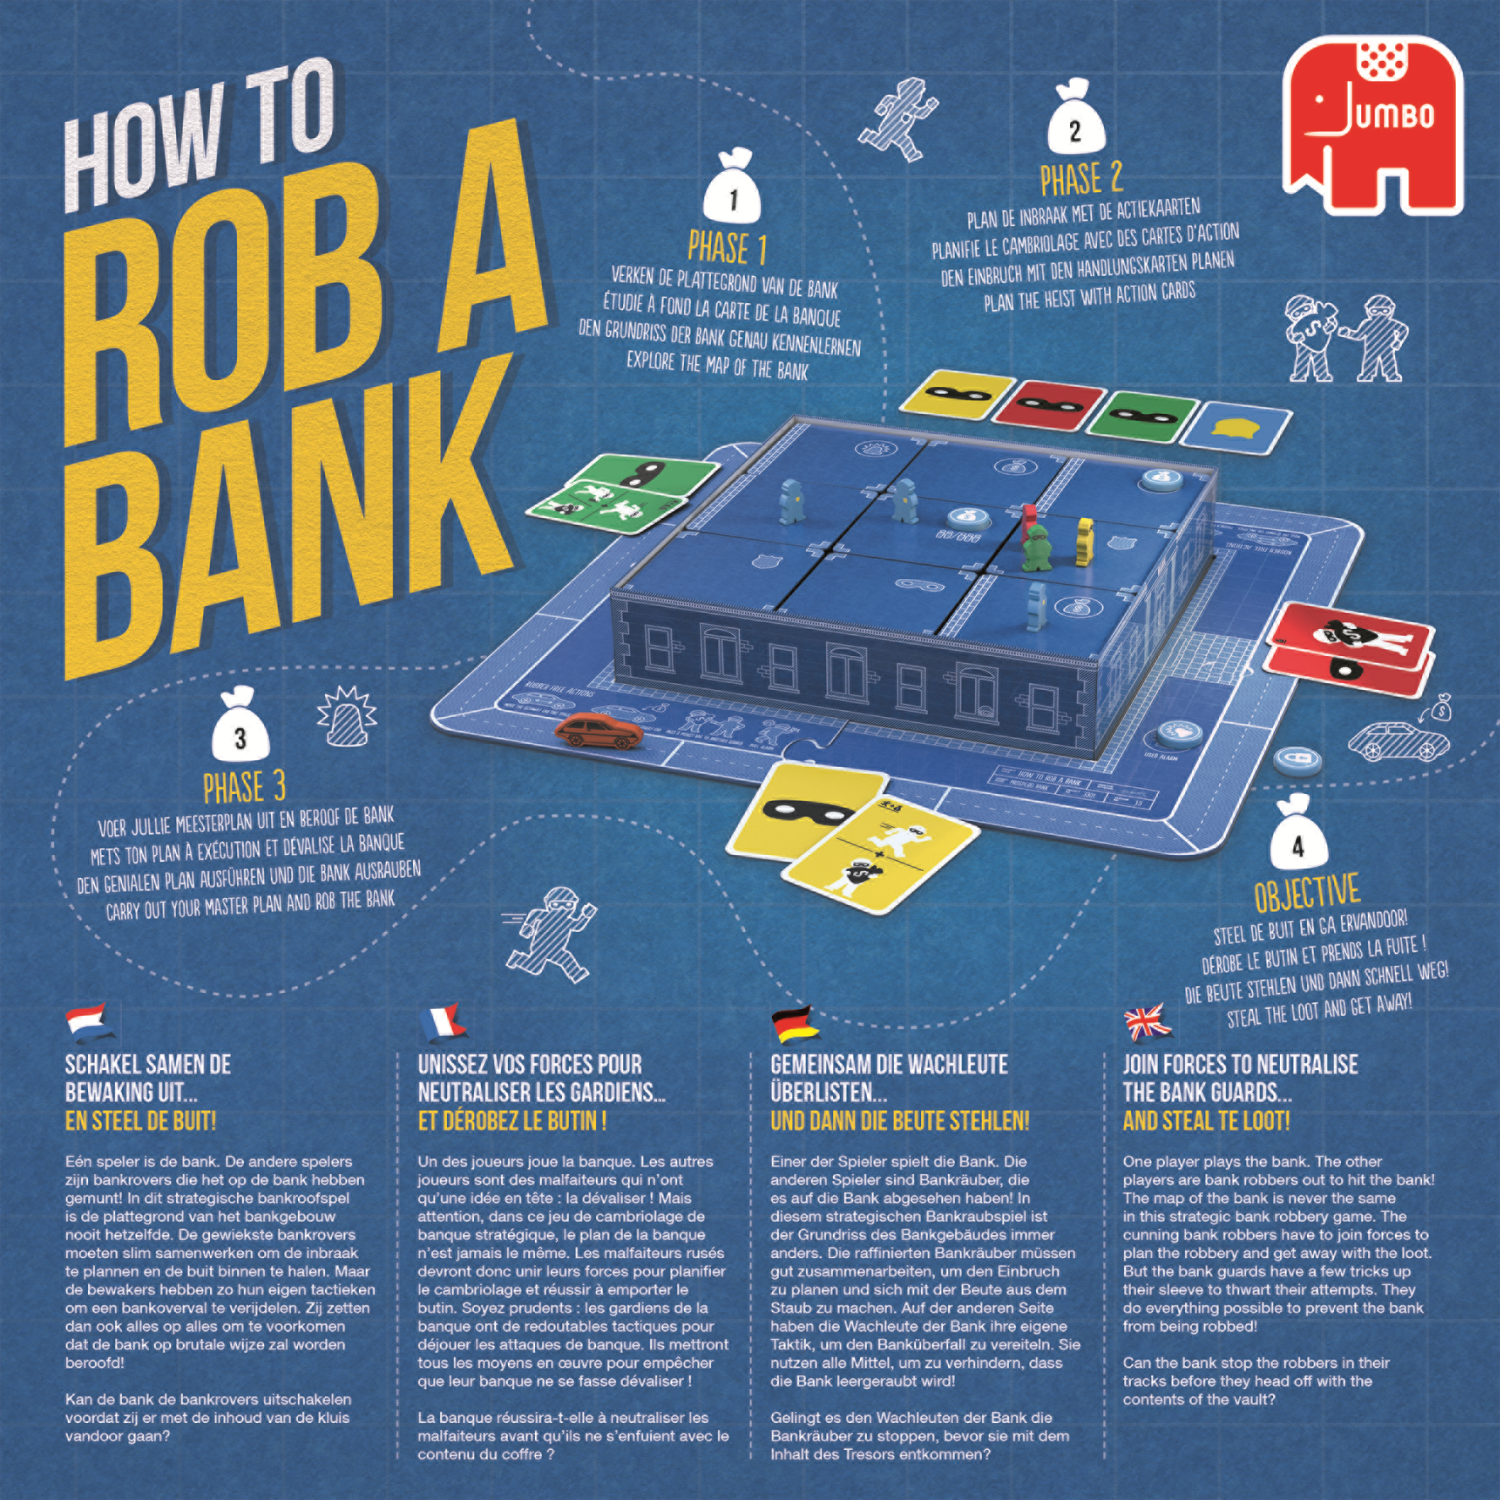 Rental - How to Rob a Bank